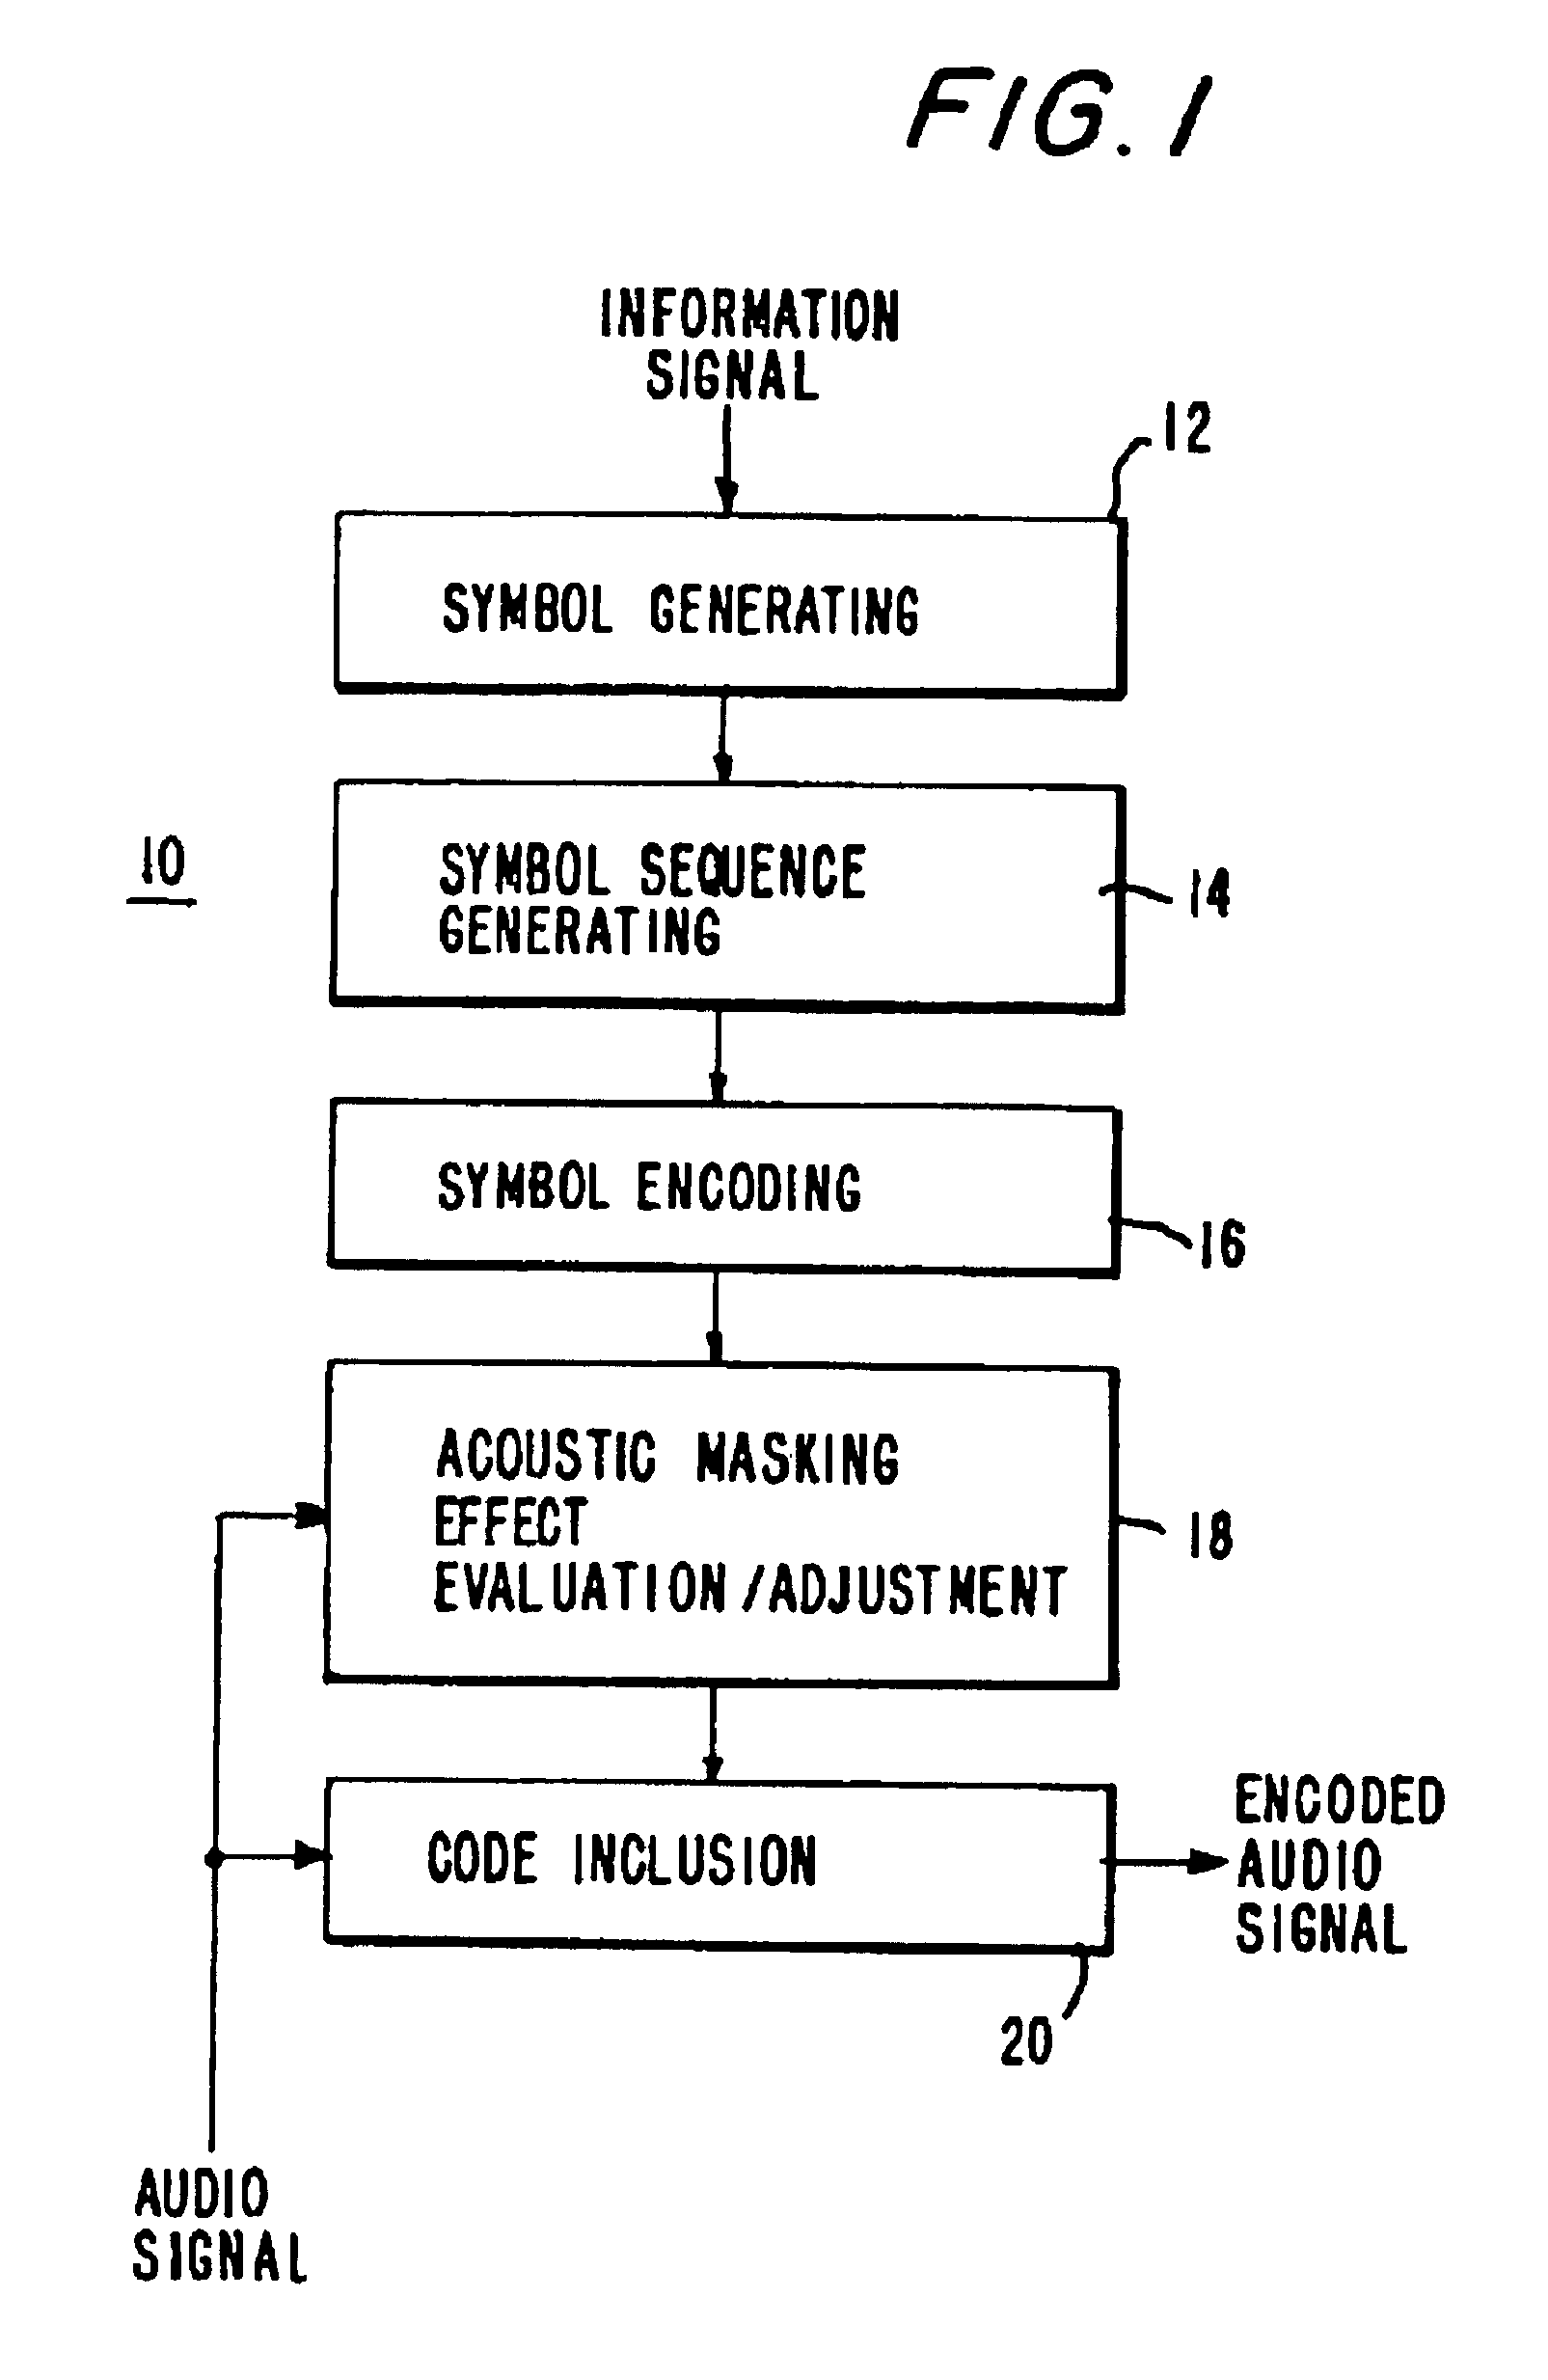 Encoding and decoding of information in audio signals